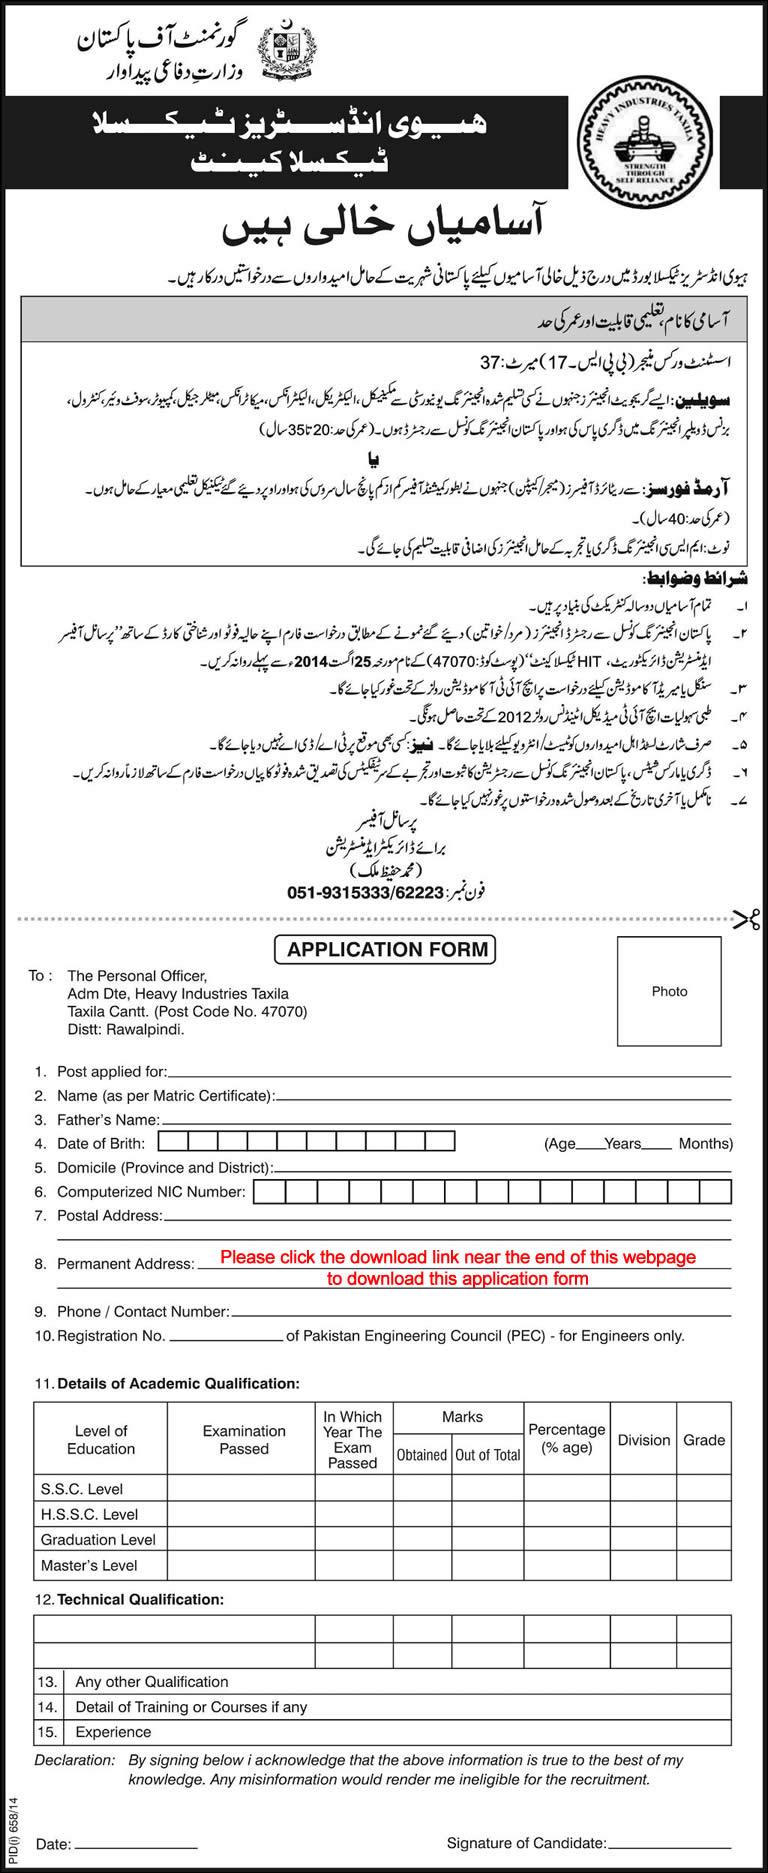 Heavy Industries Taxila Jobs 2014 August Application Form Download